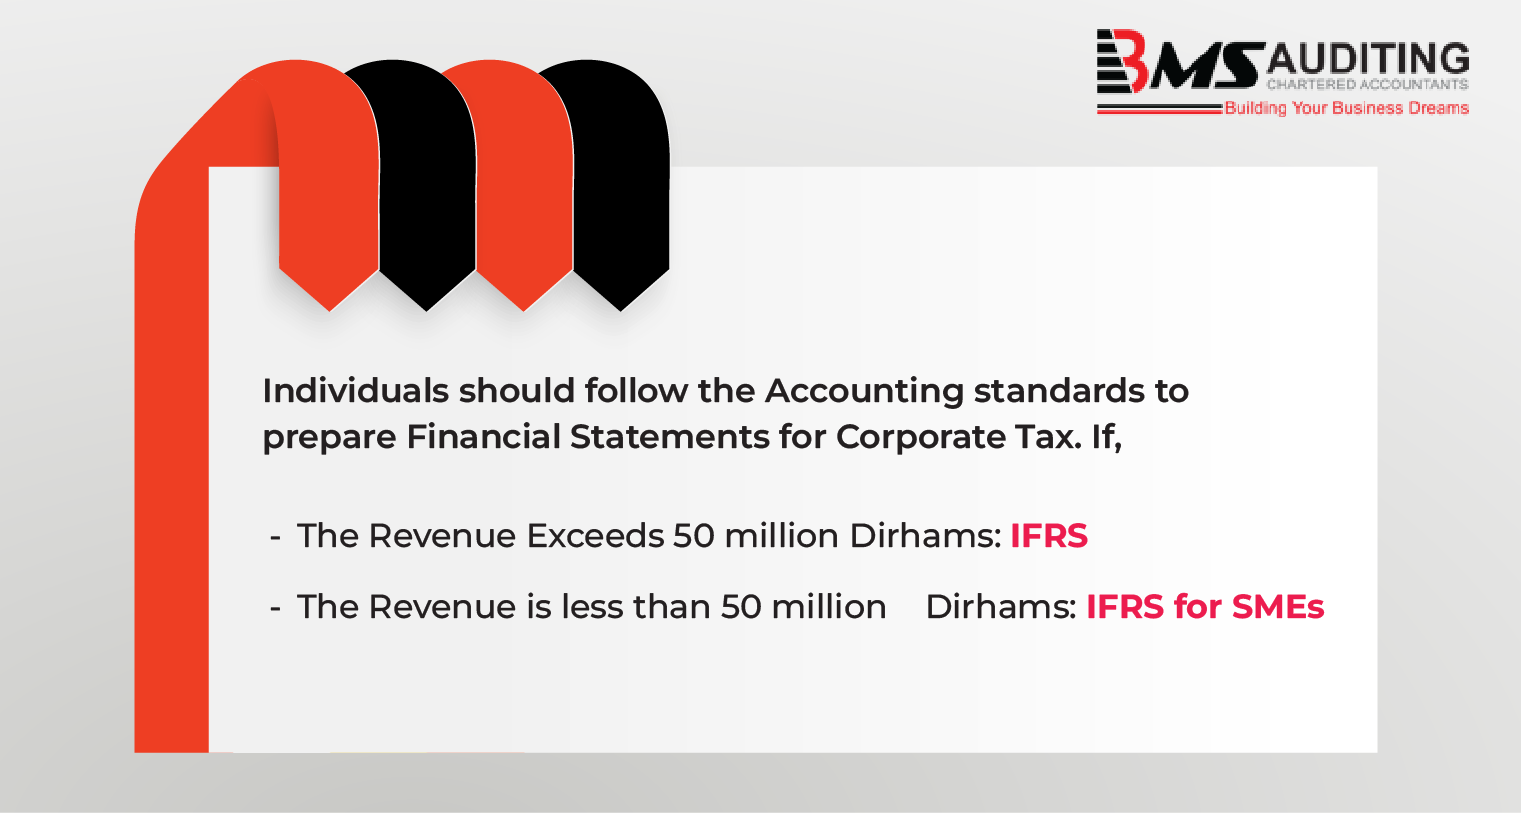 image with texts explaining the conditions and accounting standards to follow for preparation of financial statements for UAE corporate Tax